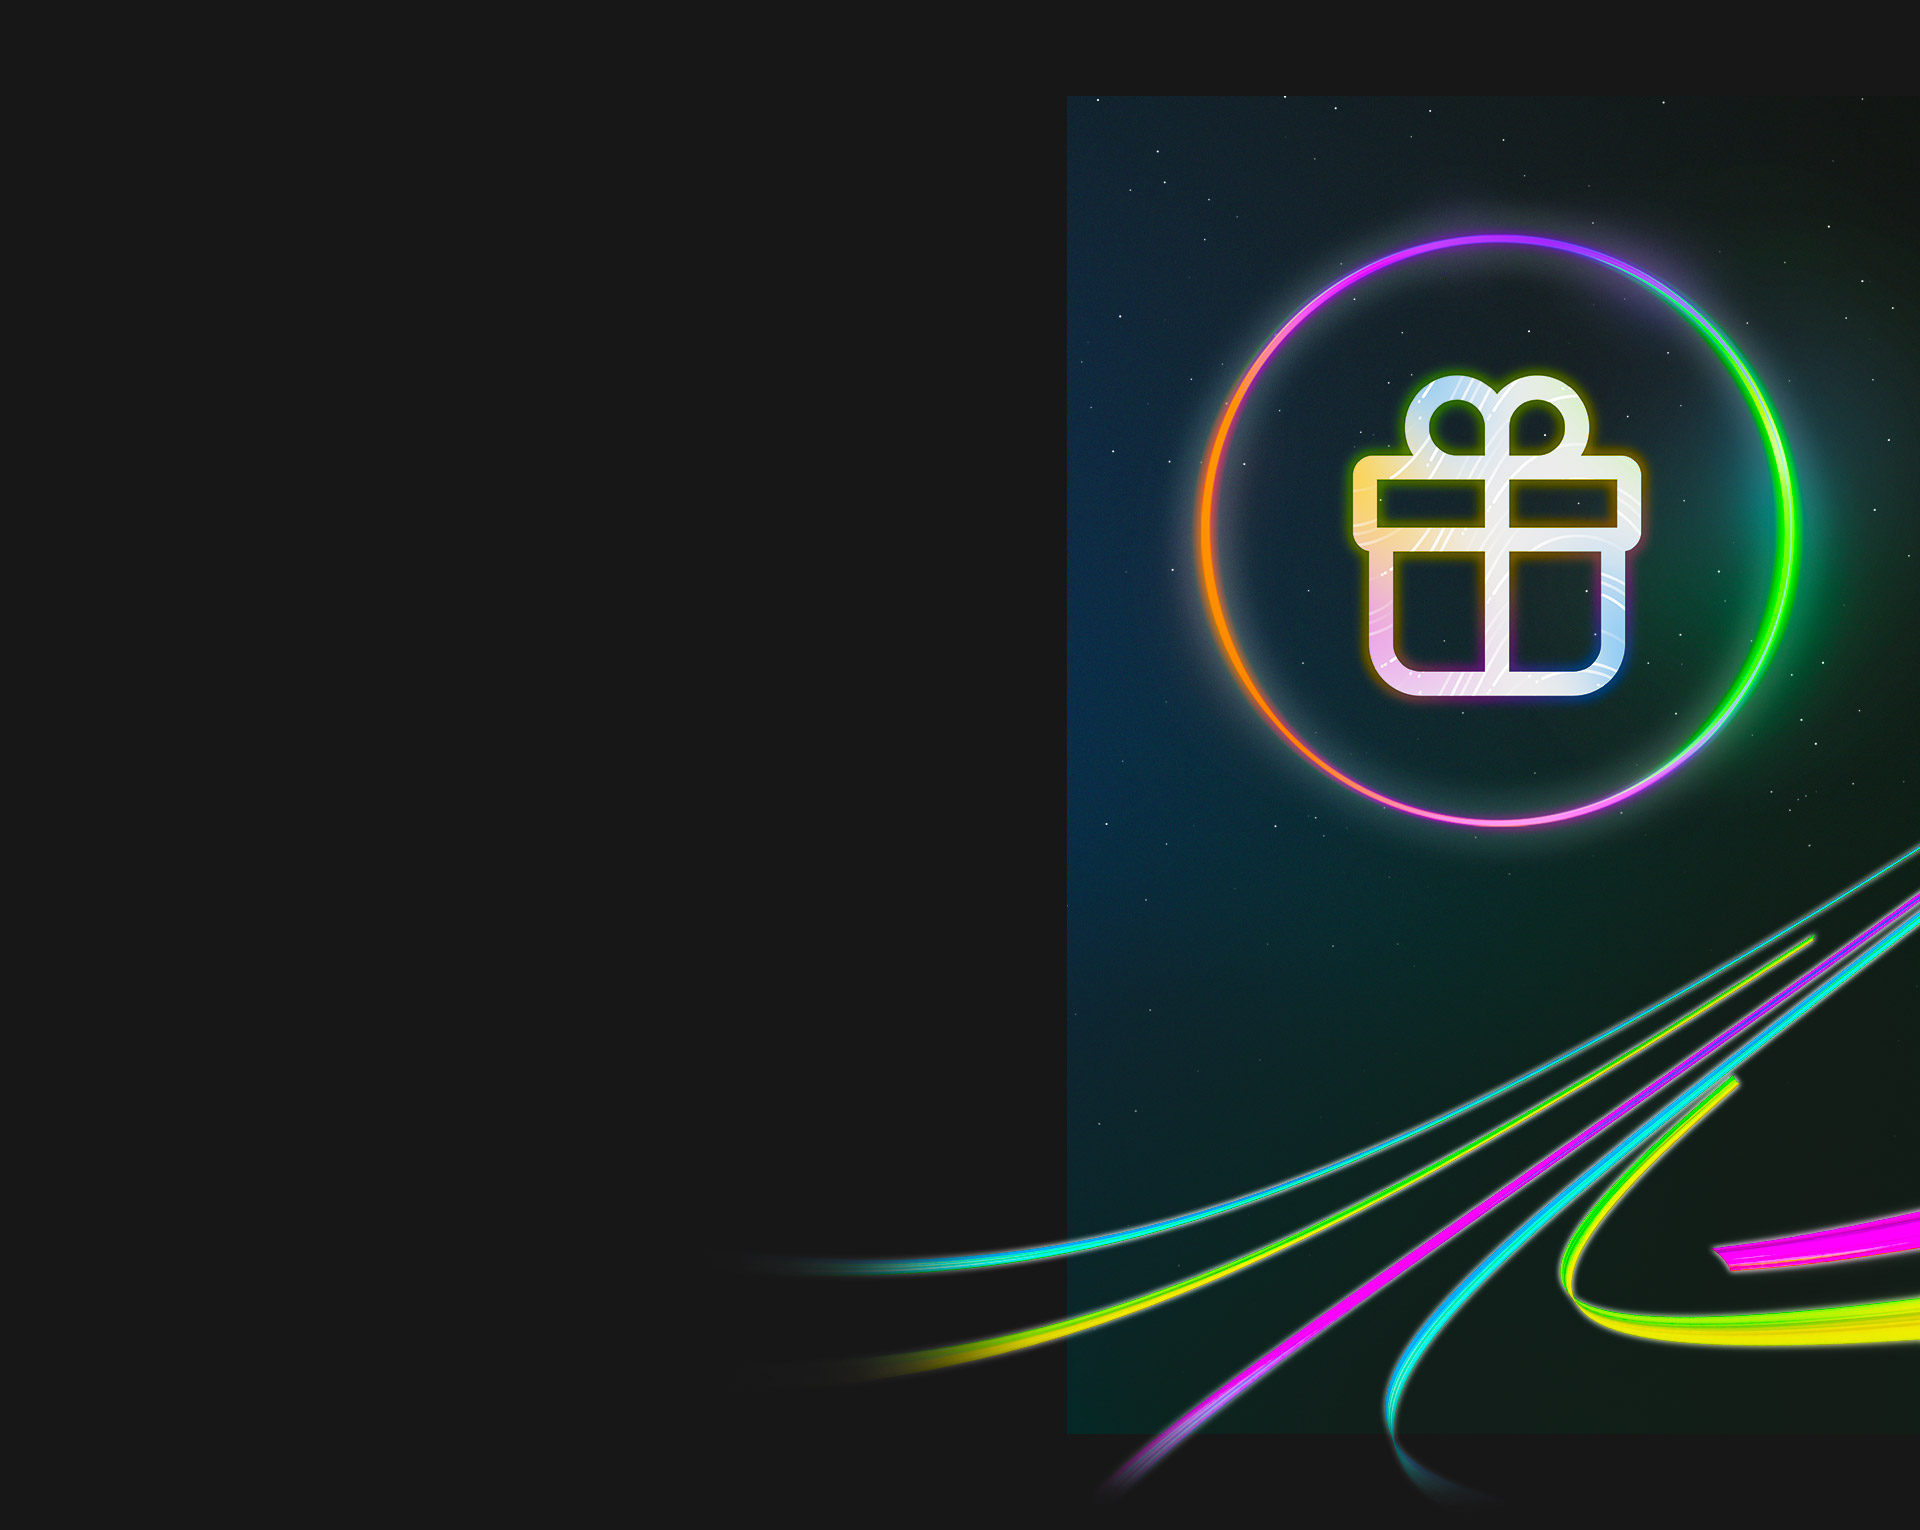 A gift box icon in a glowing neon circle.